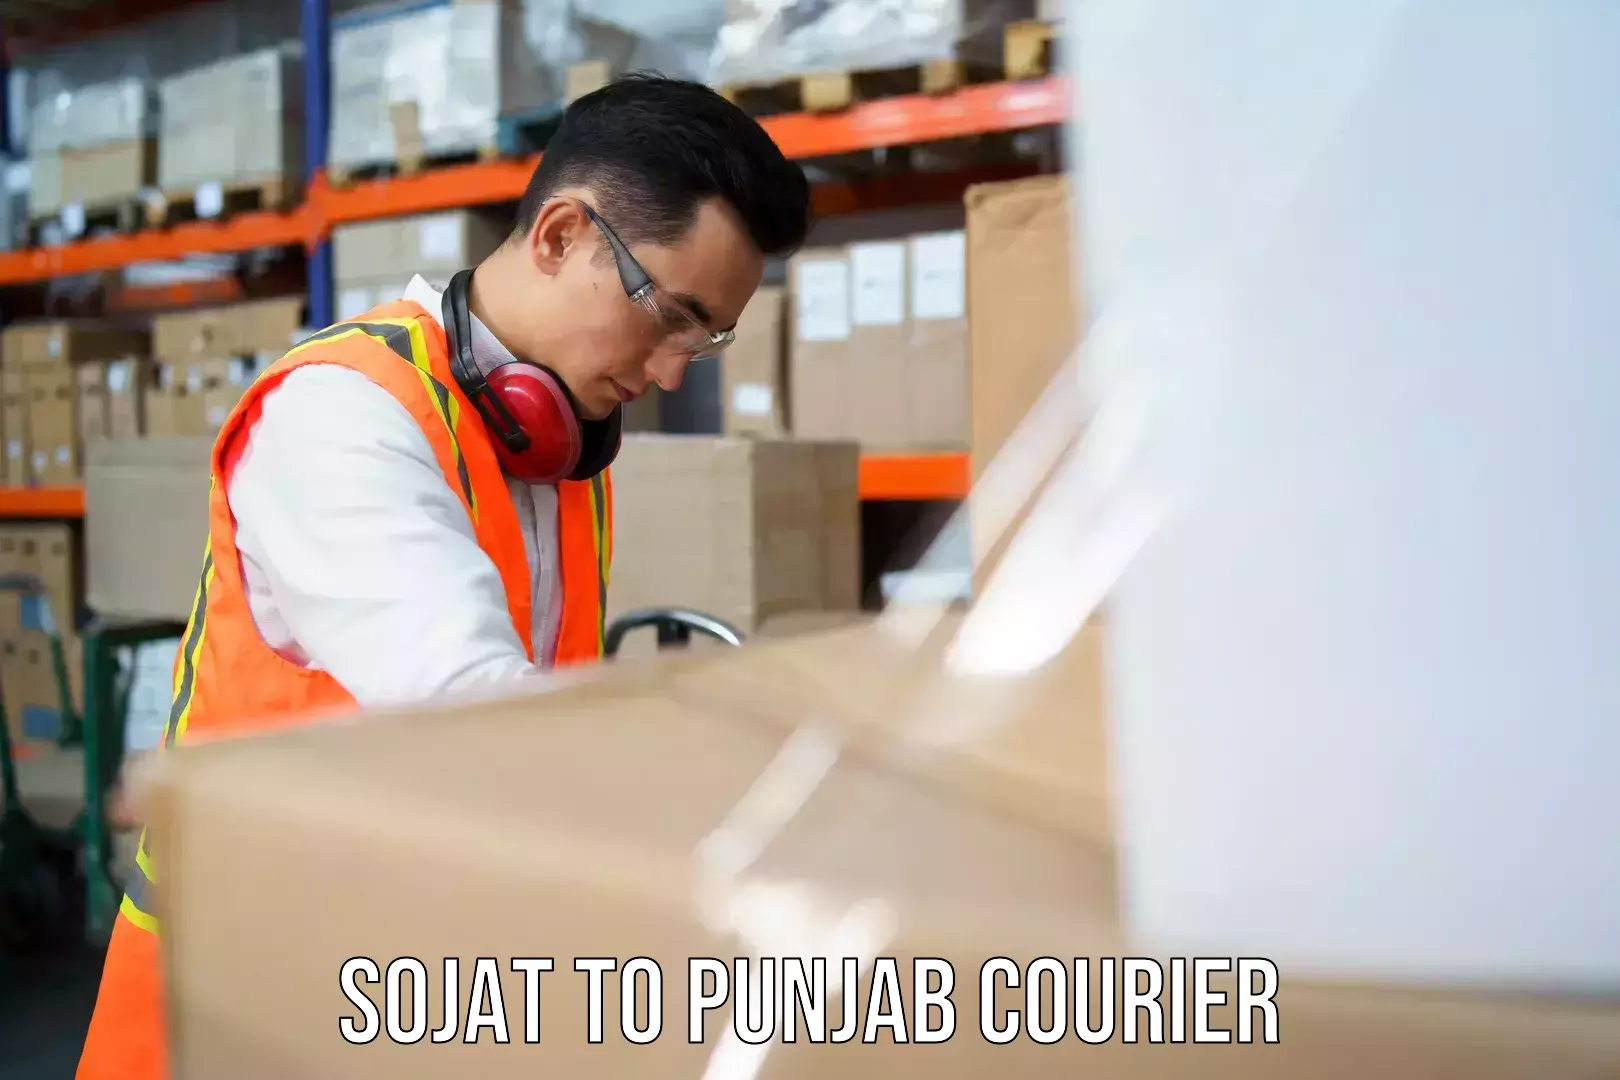 Nationwide delivery network Sojat to Punjab